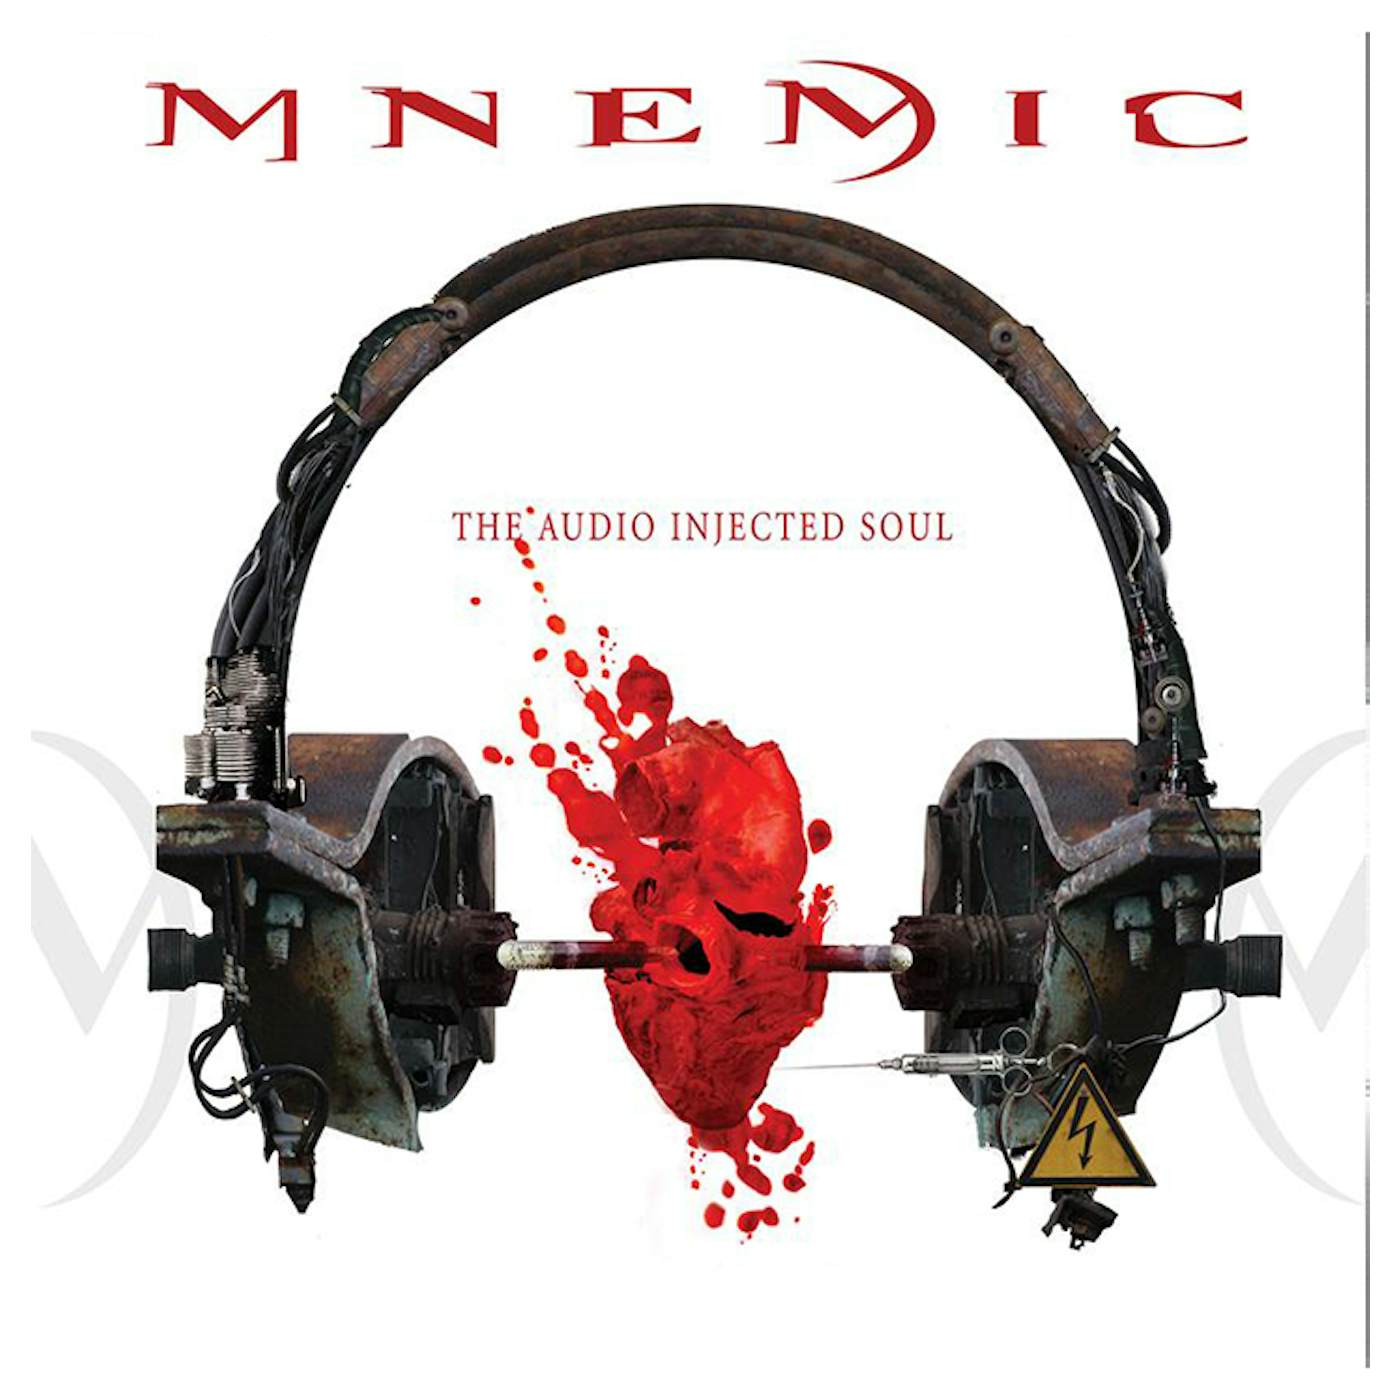 MNEMIC - 'The Audio Injected Soul' CD